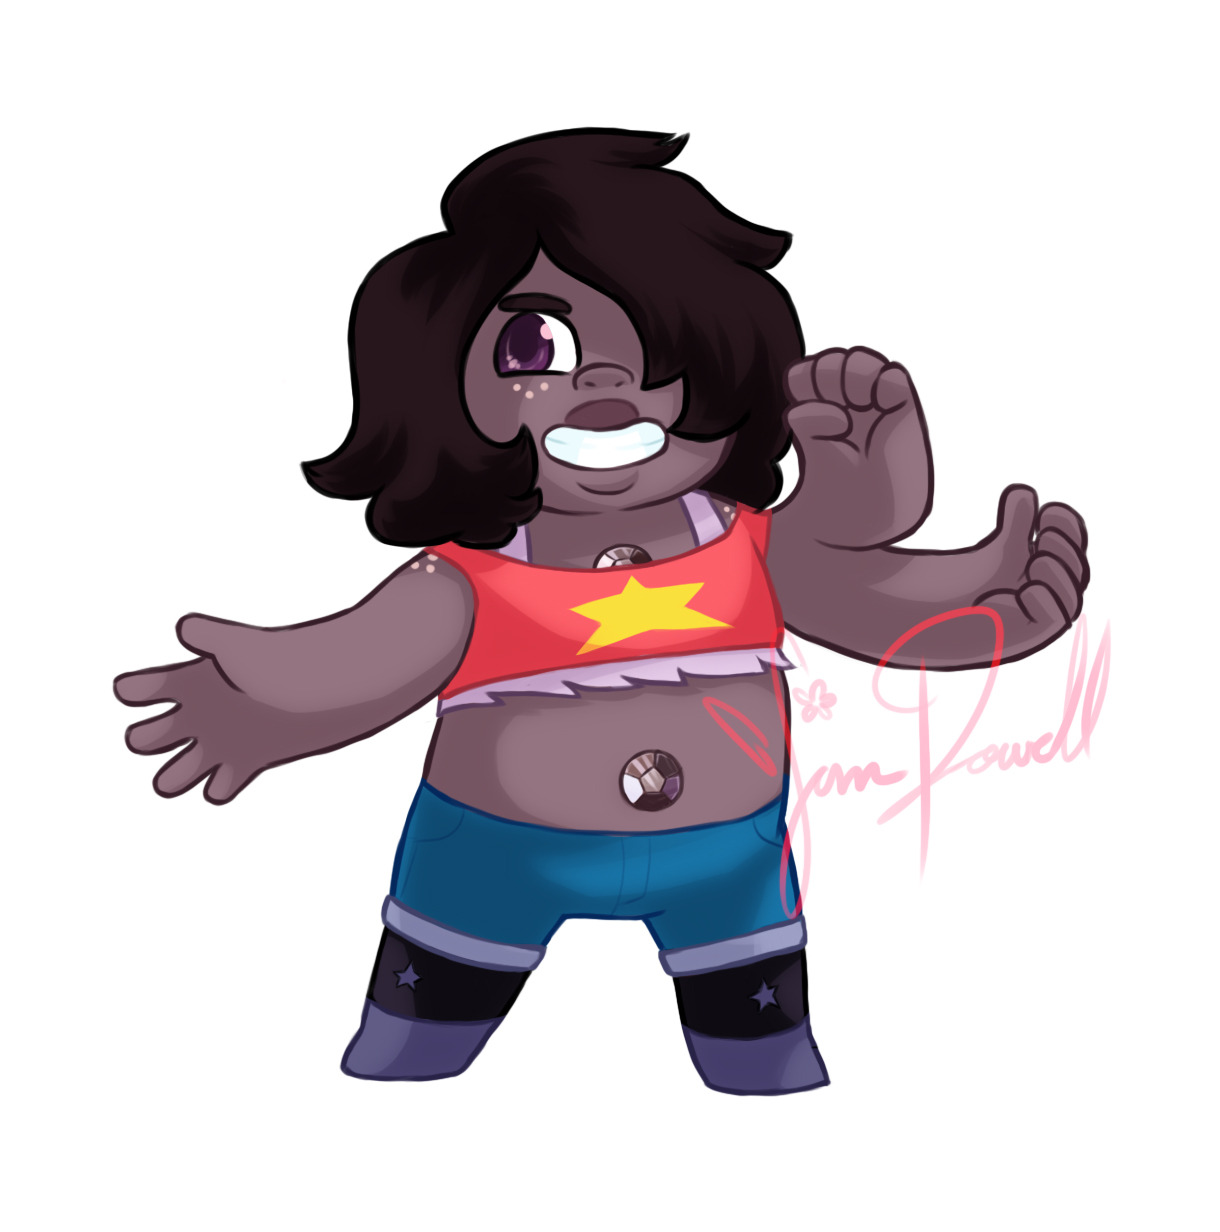 Im almost completely out of sticker sheets for consistent printing of my Steven Universe stickers, but I have enough to include Smoky Quartz and Pink Diamond. I was unsure what to do for Pink but I...